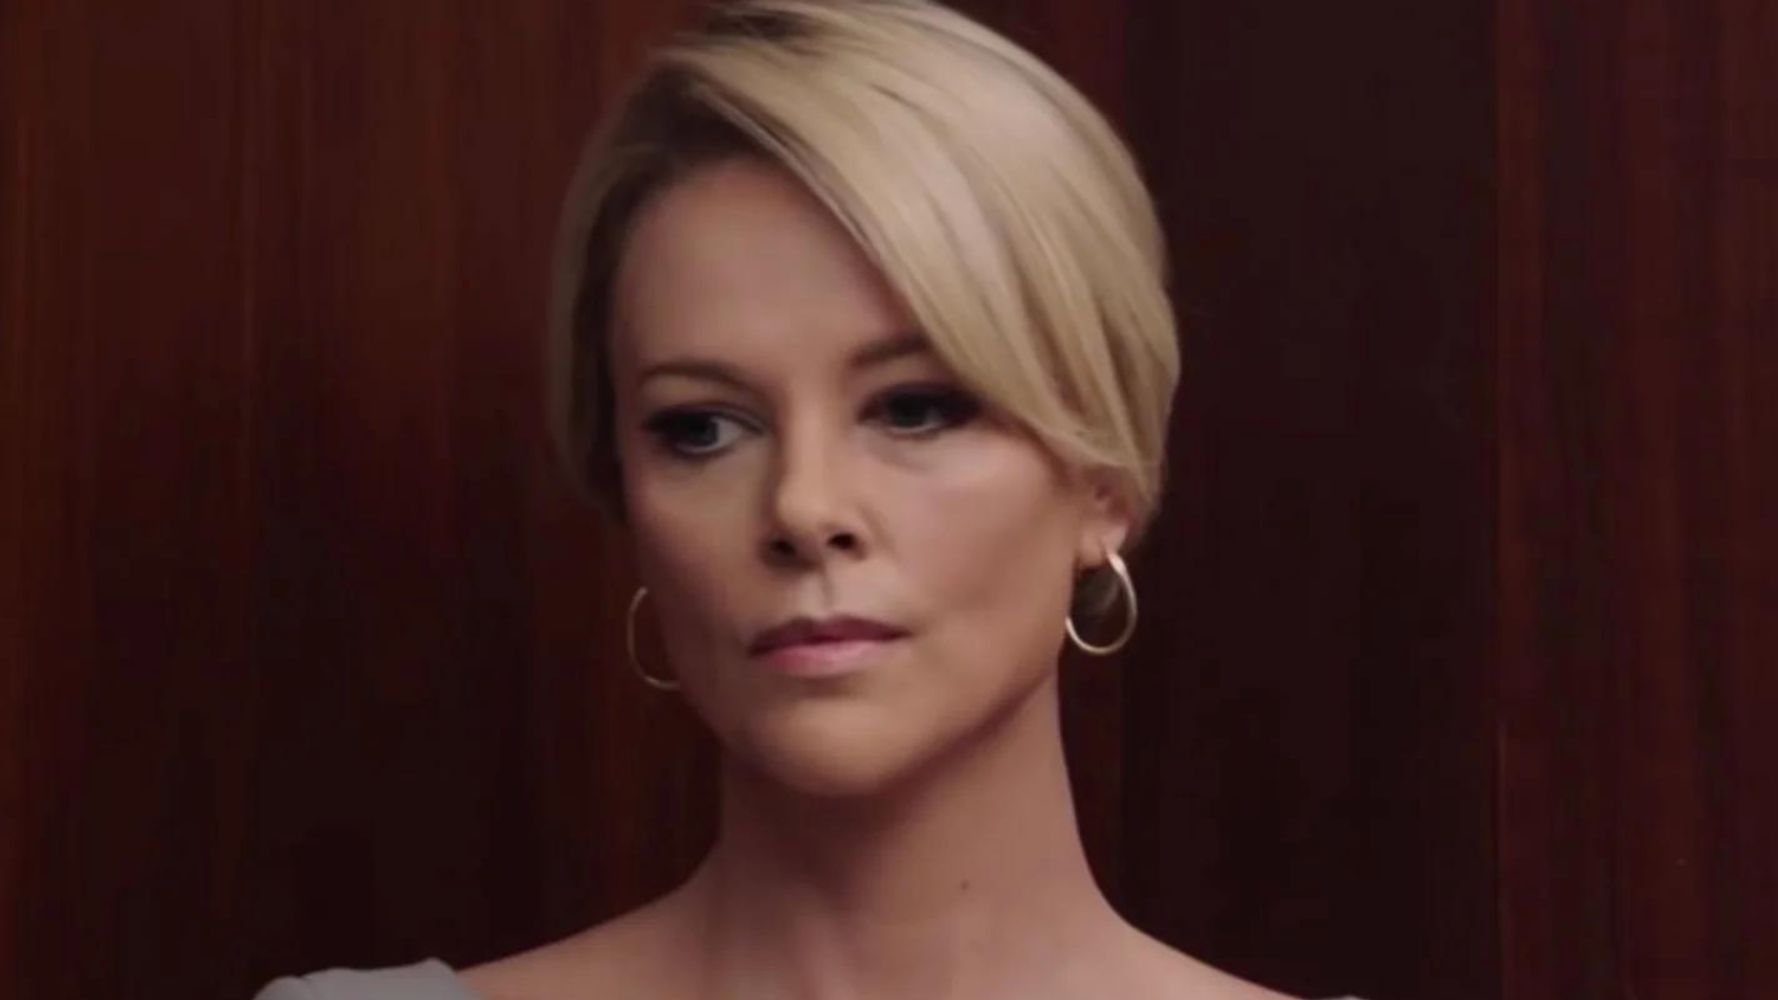 Charlize Theron Transforms Into Megyn Kelly In Tense 'Bombshell' Trailer | HuffPost1775 x 1000